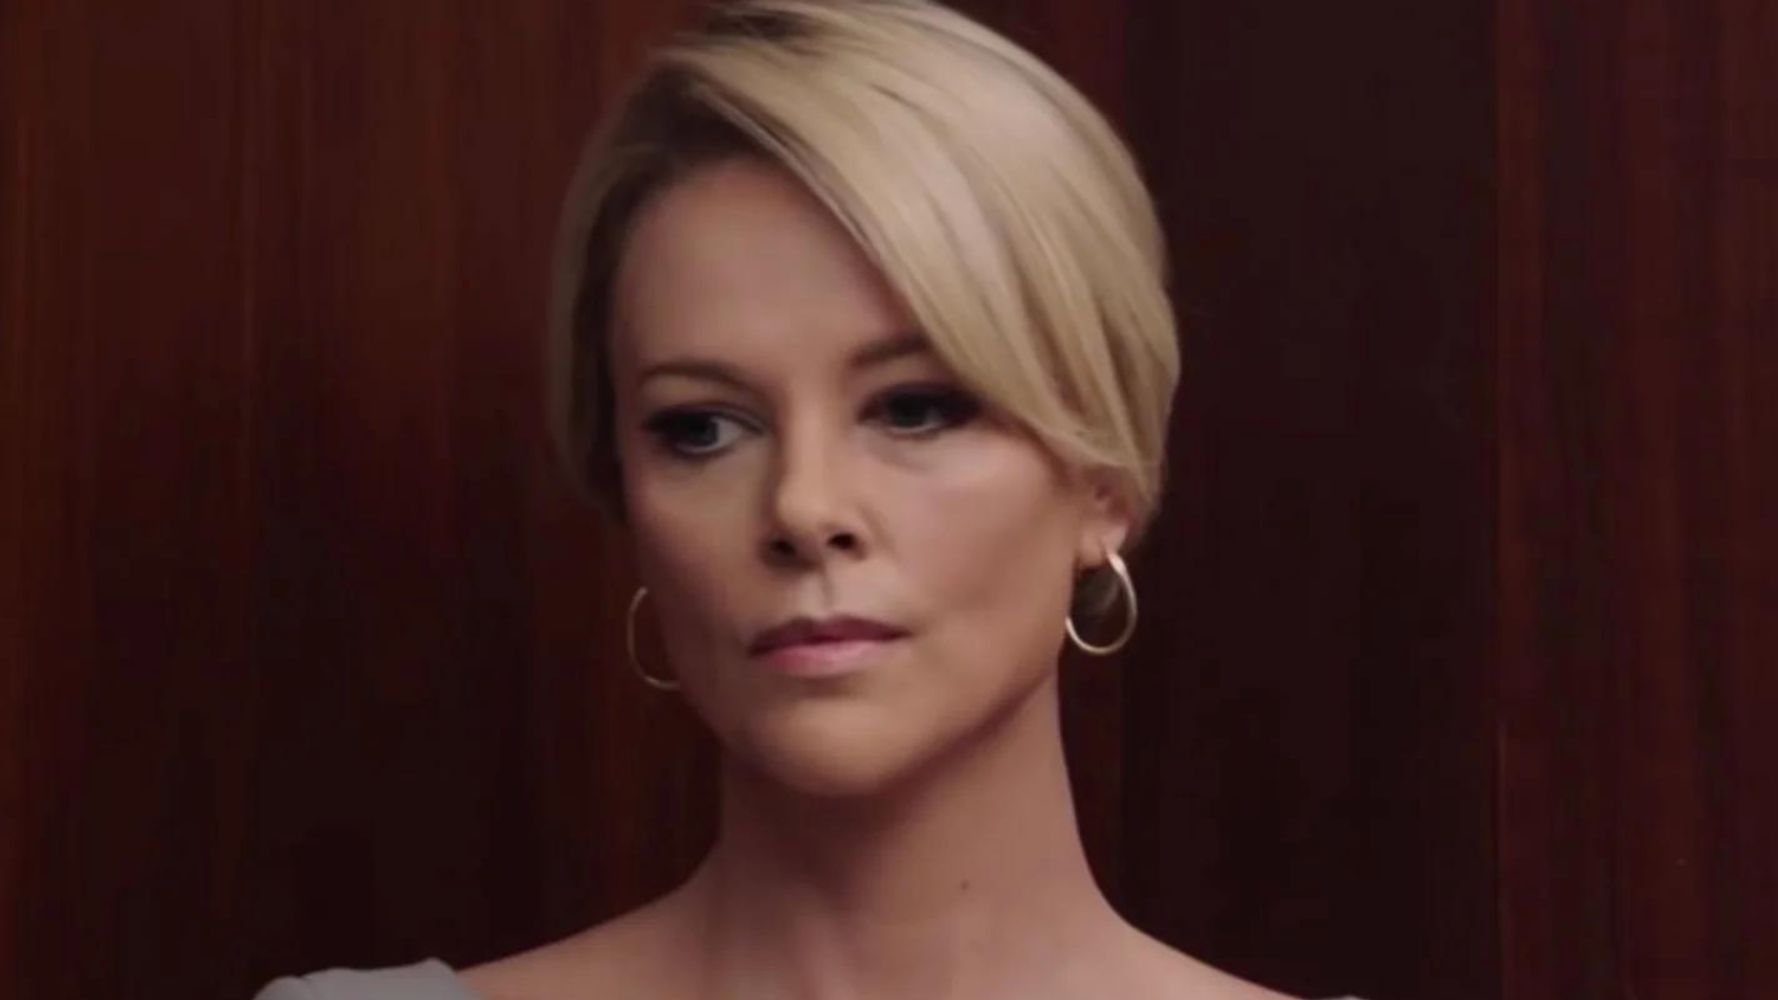 Charlize Theron Transforms Into Megyn Kelly In Tense 'Bombshell' Trailer | HuffPost1775 x 1000